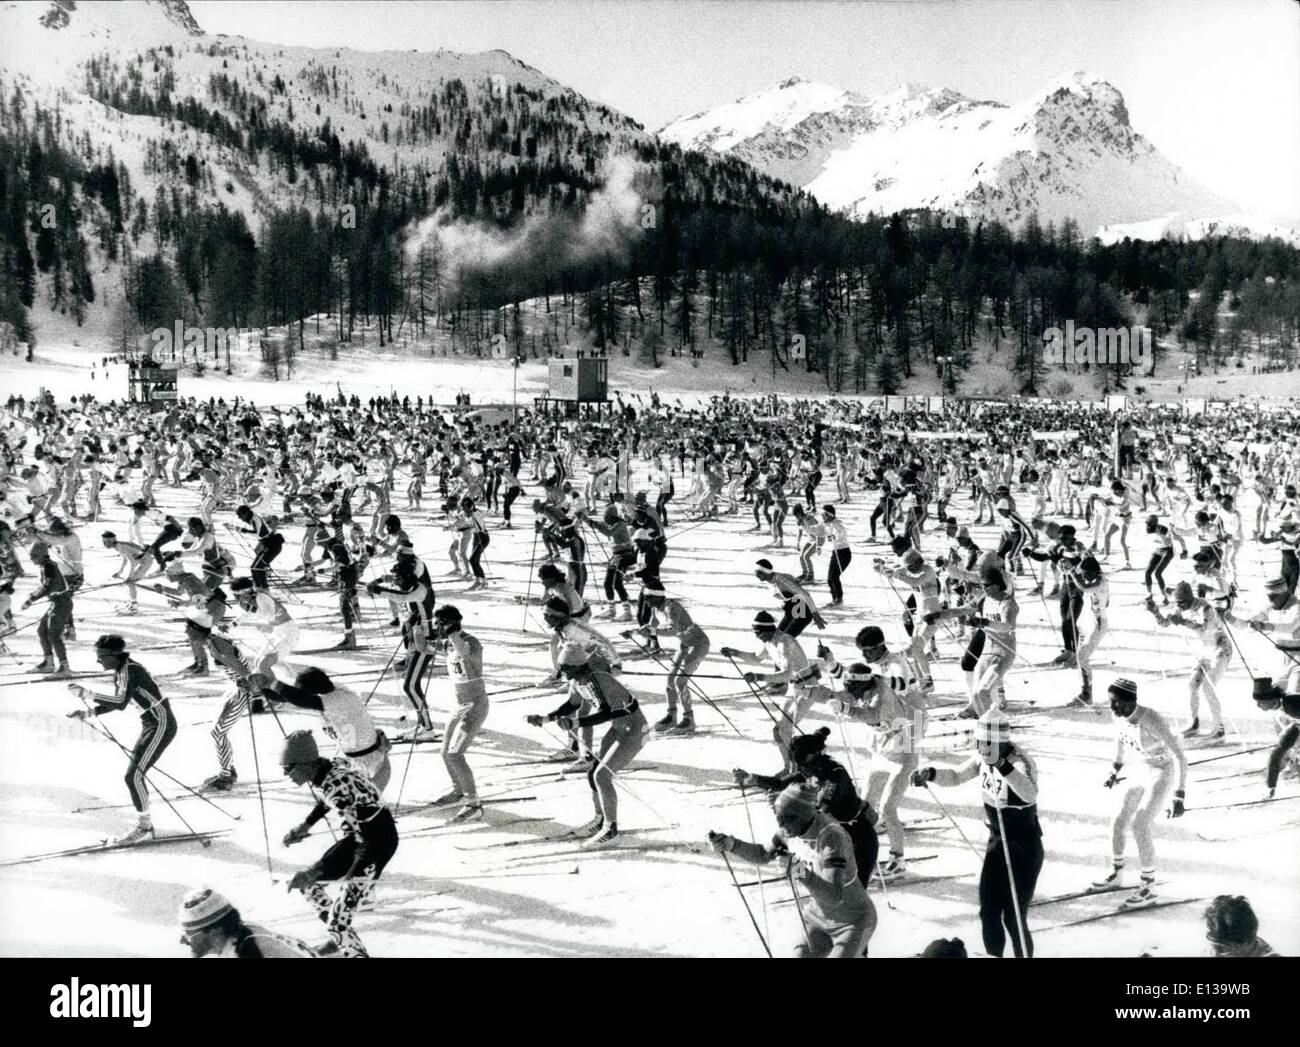 Feb. 29, 2012 - 11,000 at the Cross Country Skiing. At the 22nd Engadin Ski-Marathon for amateurs in the Grisons participated about 11,000 runners. Our picture shows the crowd on the way. Keystone Press Zurich 12.3.90 Stock Photo